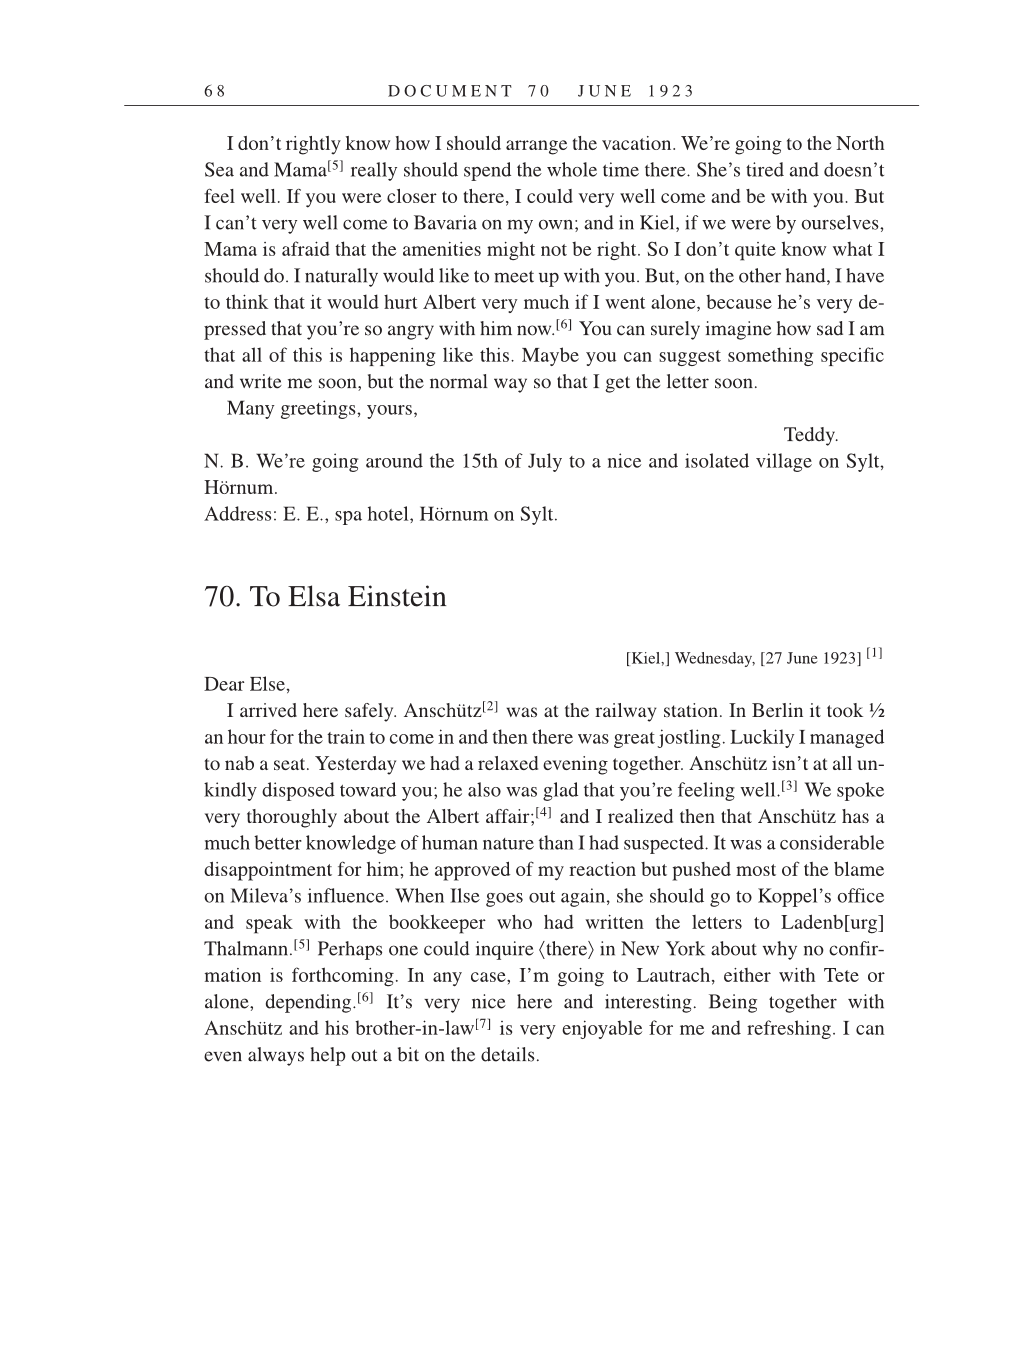 Volume 14: The Berlin Years: Writings & Correspondence, April 1923-May 1925 (English Translation Supplement) page 68